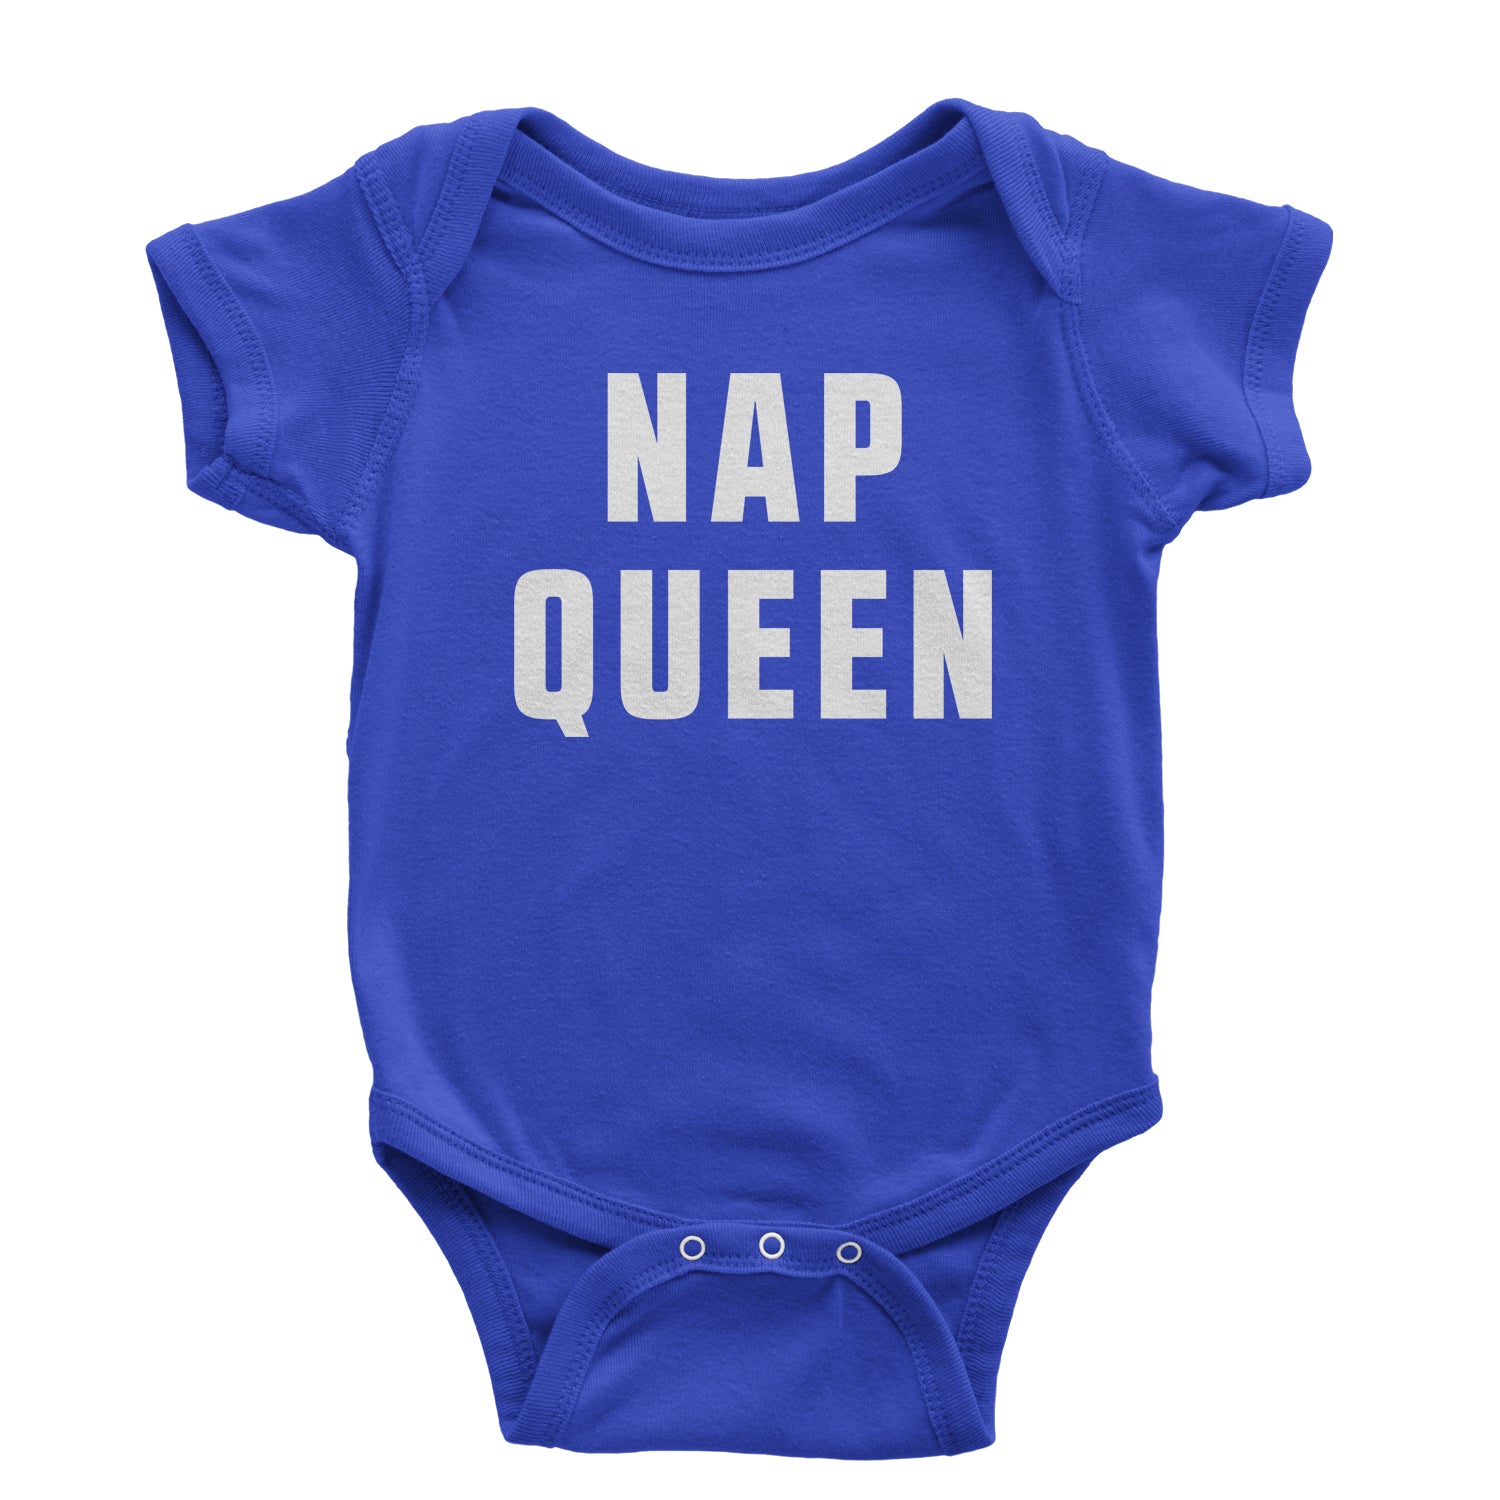 Nap Queen (White Print) Comfy Top For Lazy Days Infant One-Piece Romper Bodysuit all, day, function, lazy, nap, pajamas, queen, siesta, sleep, tired, to, too by Expression Tees